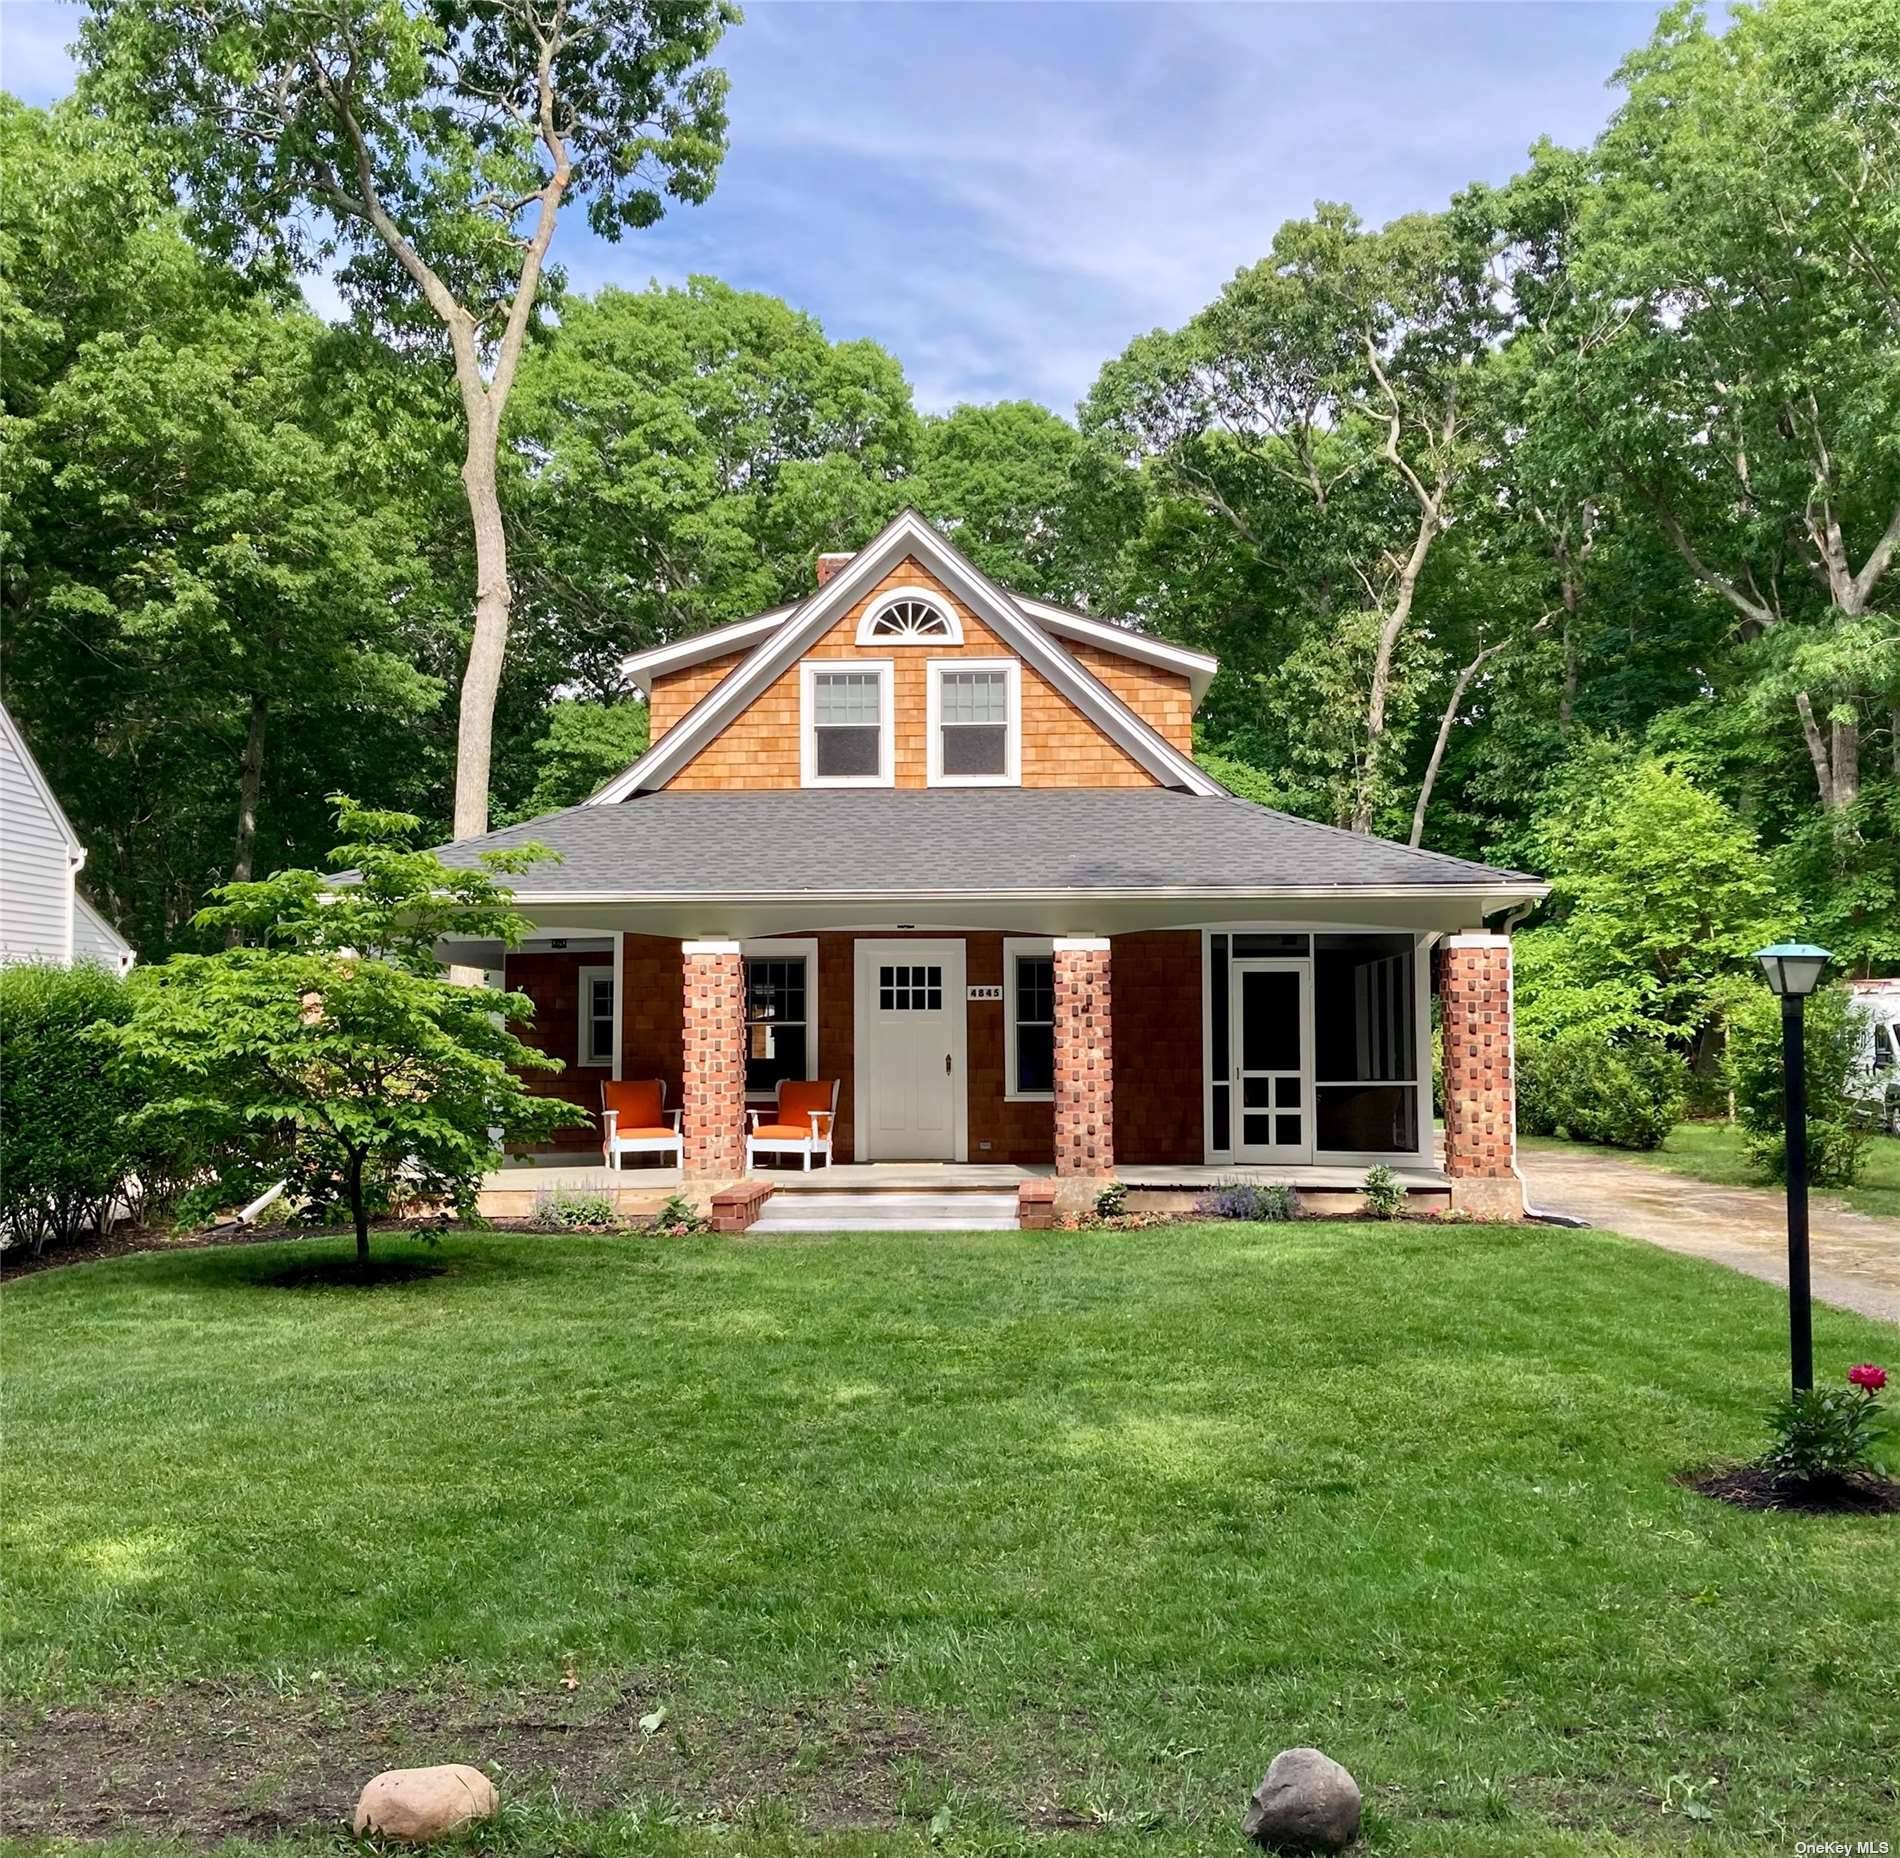 This home at 4845 South Harbor Road, Southold, is a truly unique and meticulously renovated craftsman cottage that is comfortable and charming.